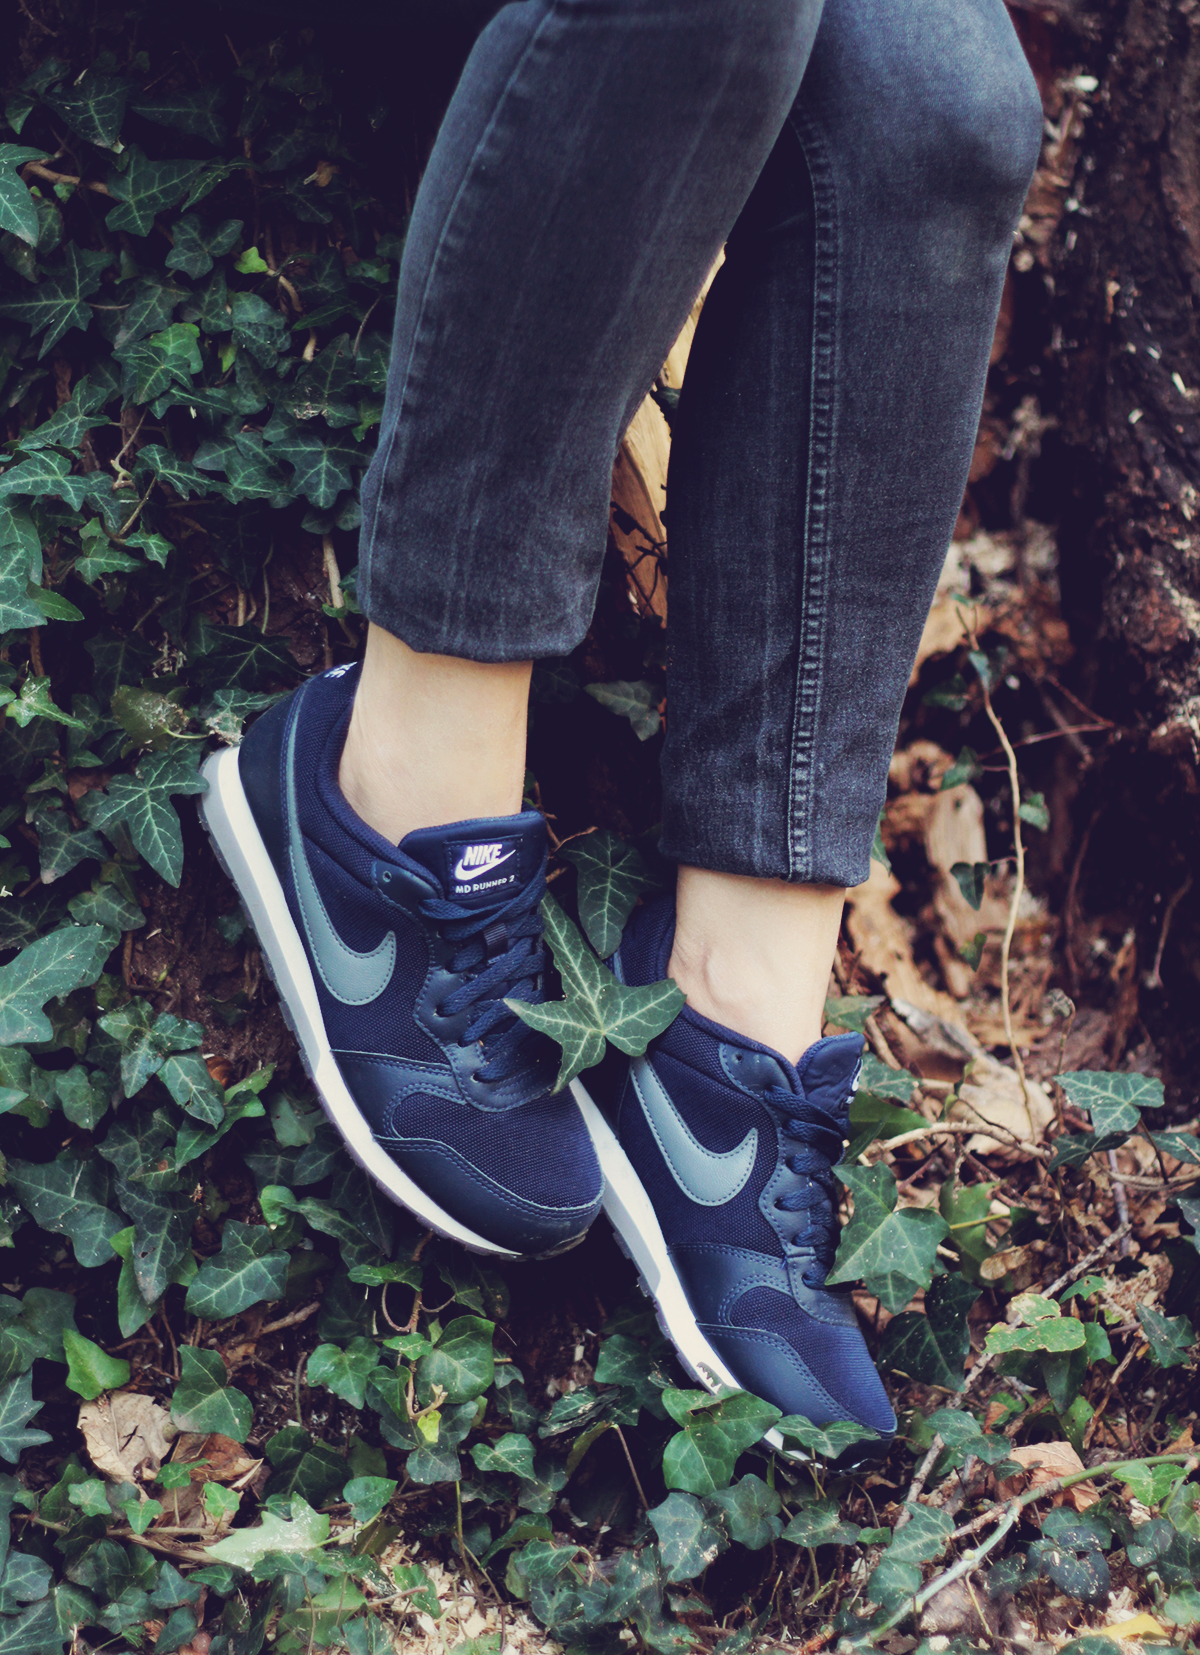 nike runners, jeans